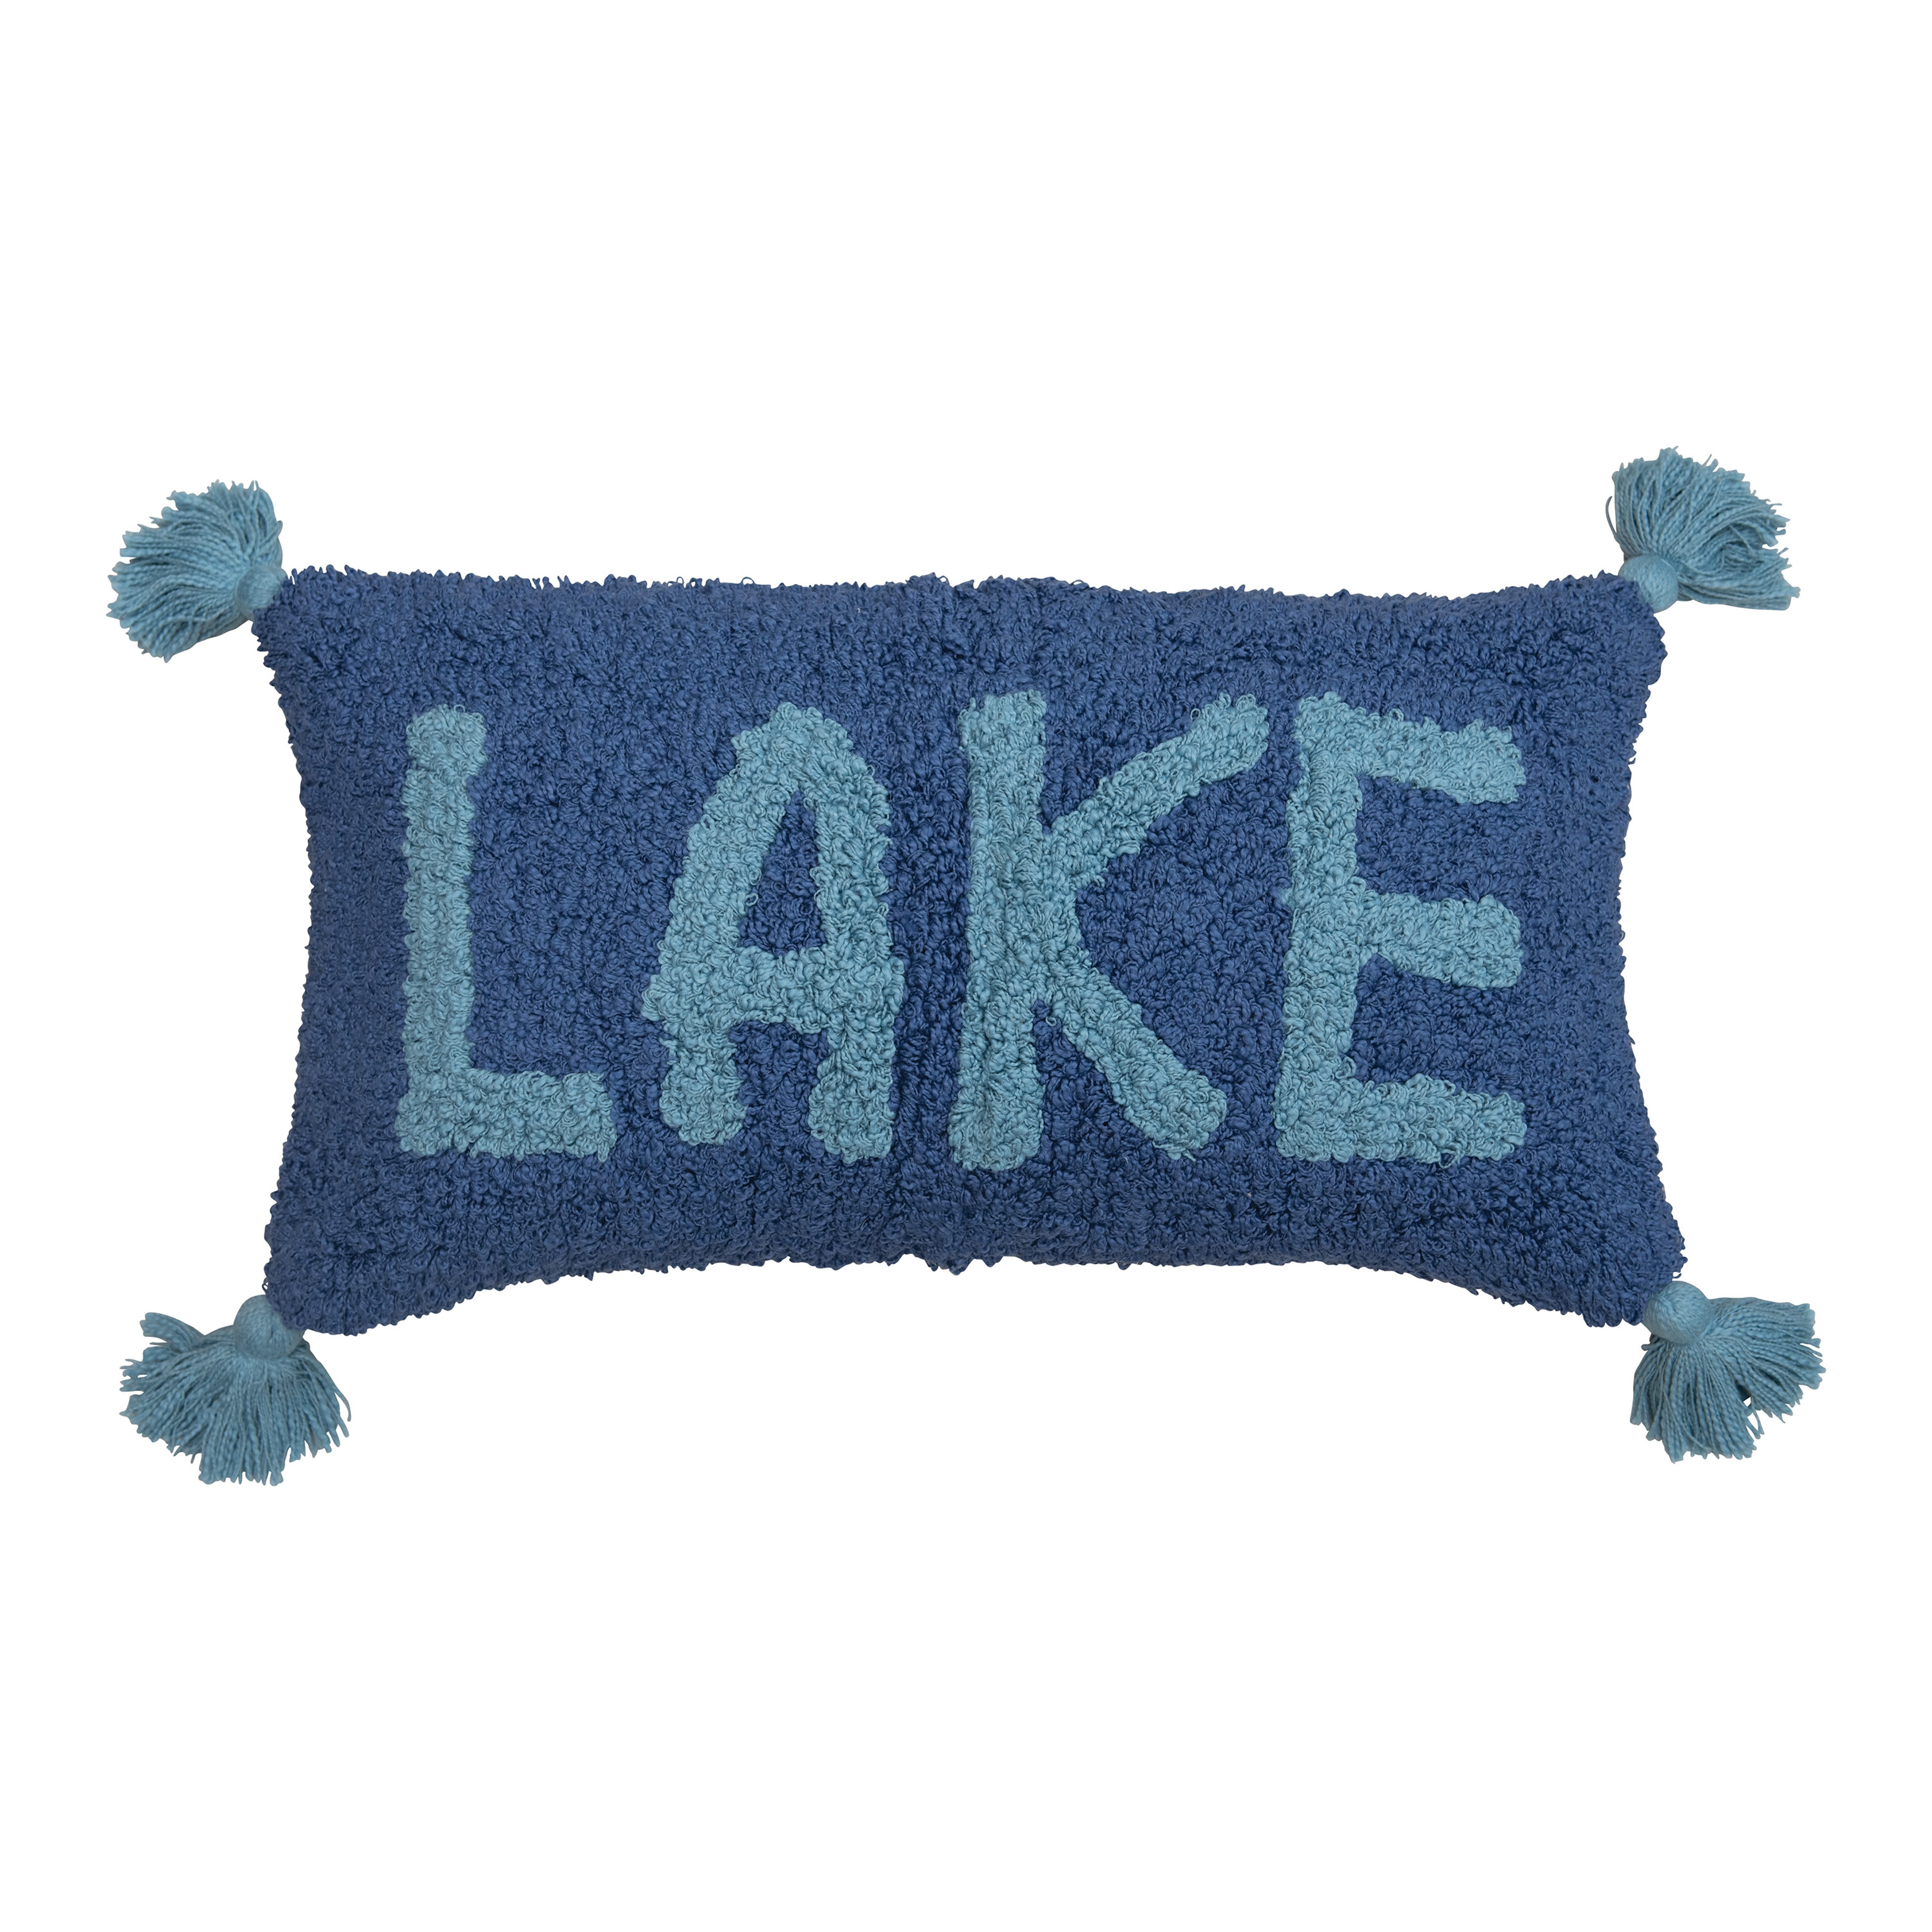 Cotton Punch Hook Lumbar Pillow with "Lake" Design and Tassels - Image 0